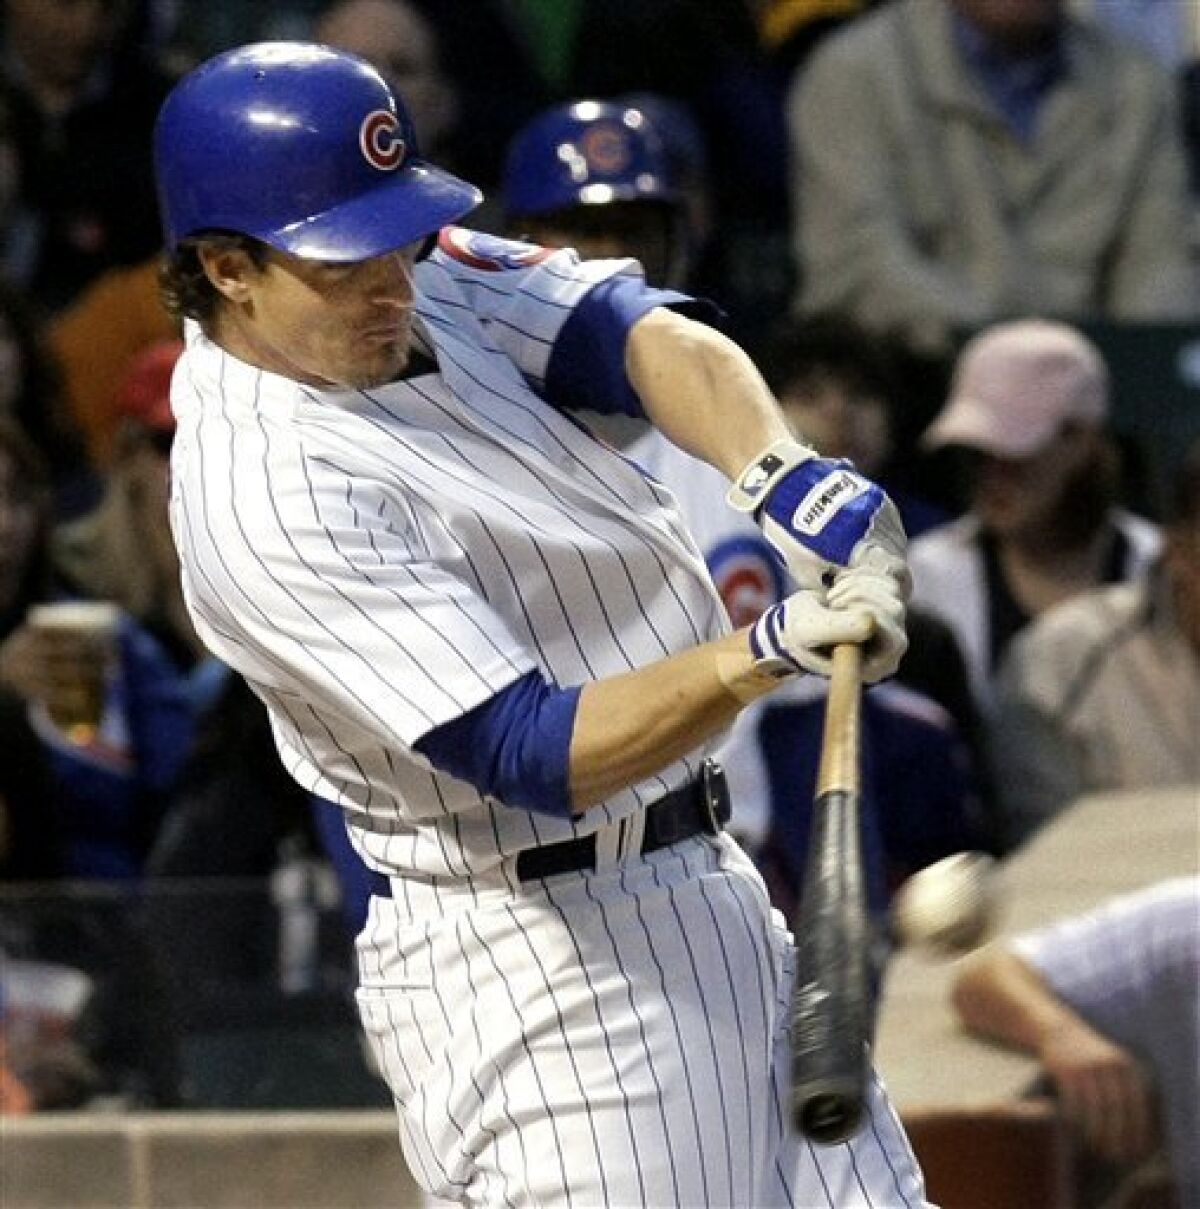 Chicago Cubs' Ryan Theriot connects for a two-run home run during the second inning of a baseball game against the San Francisco Giants at Wrigley Field in Chicago, Monday, May 4, 2009. Scoring on the play Cubs' Aaron Miles. (AP Photo/Charles Rex Arbogast)